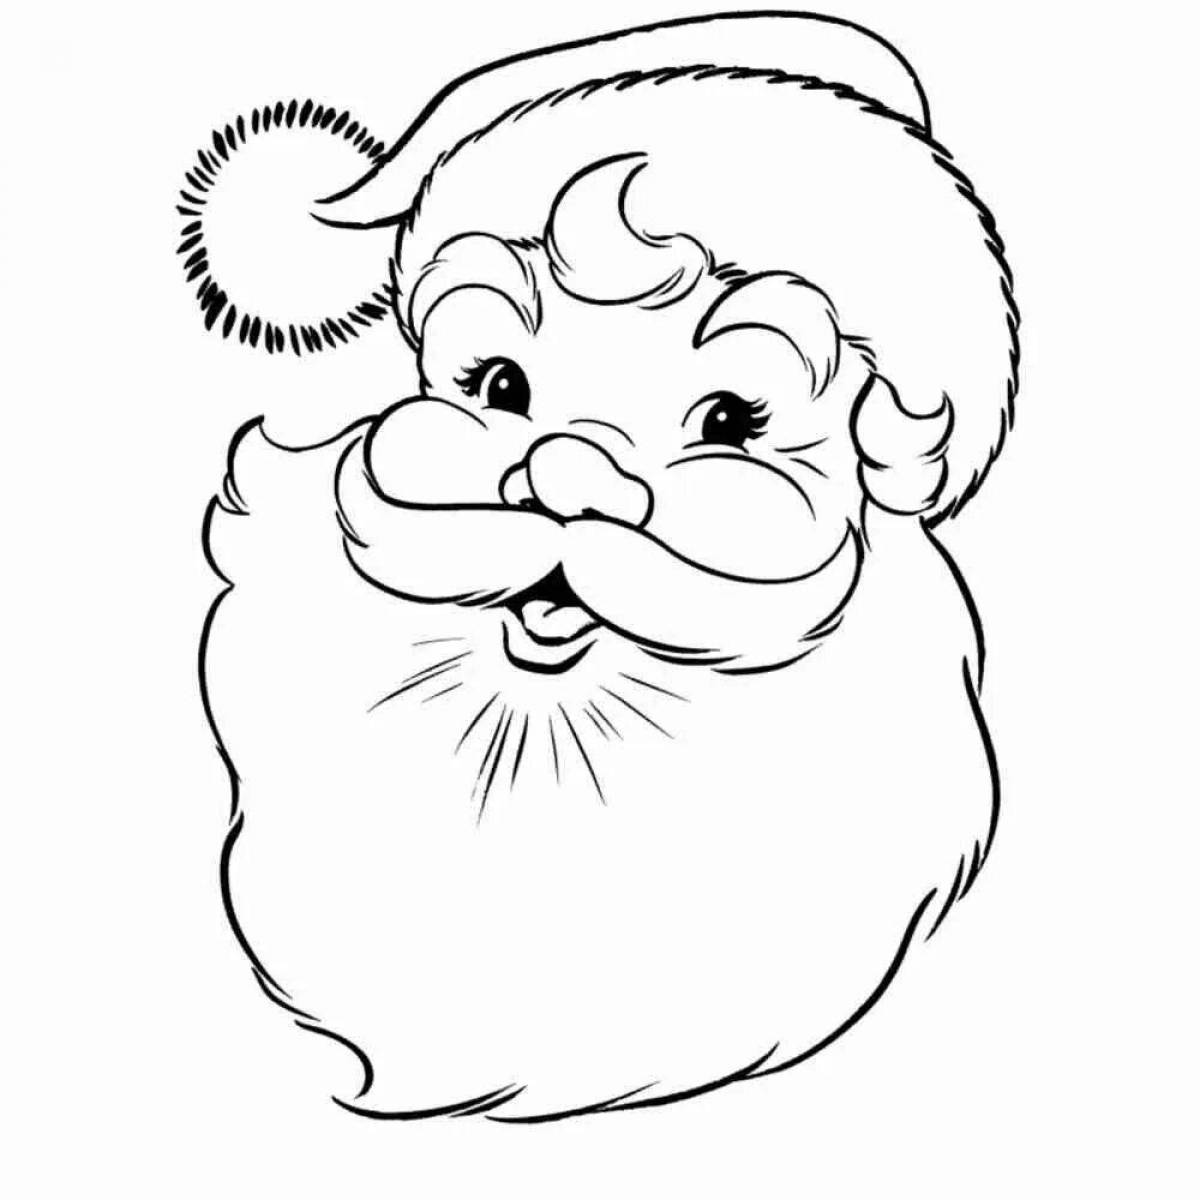 Whimsical Santa Claus coloring book for 2-3 year olds